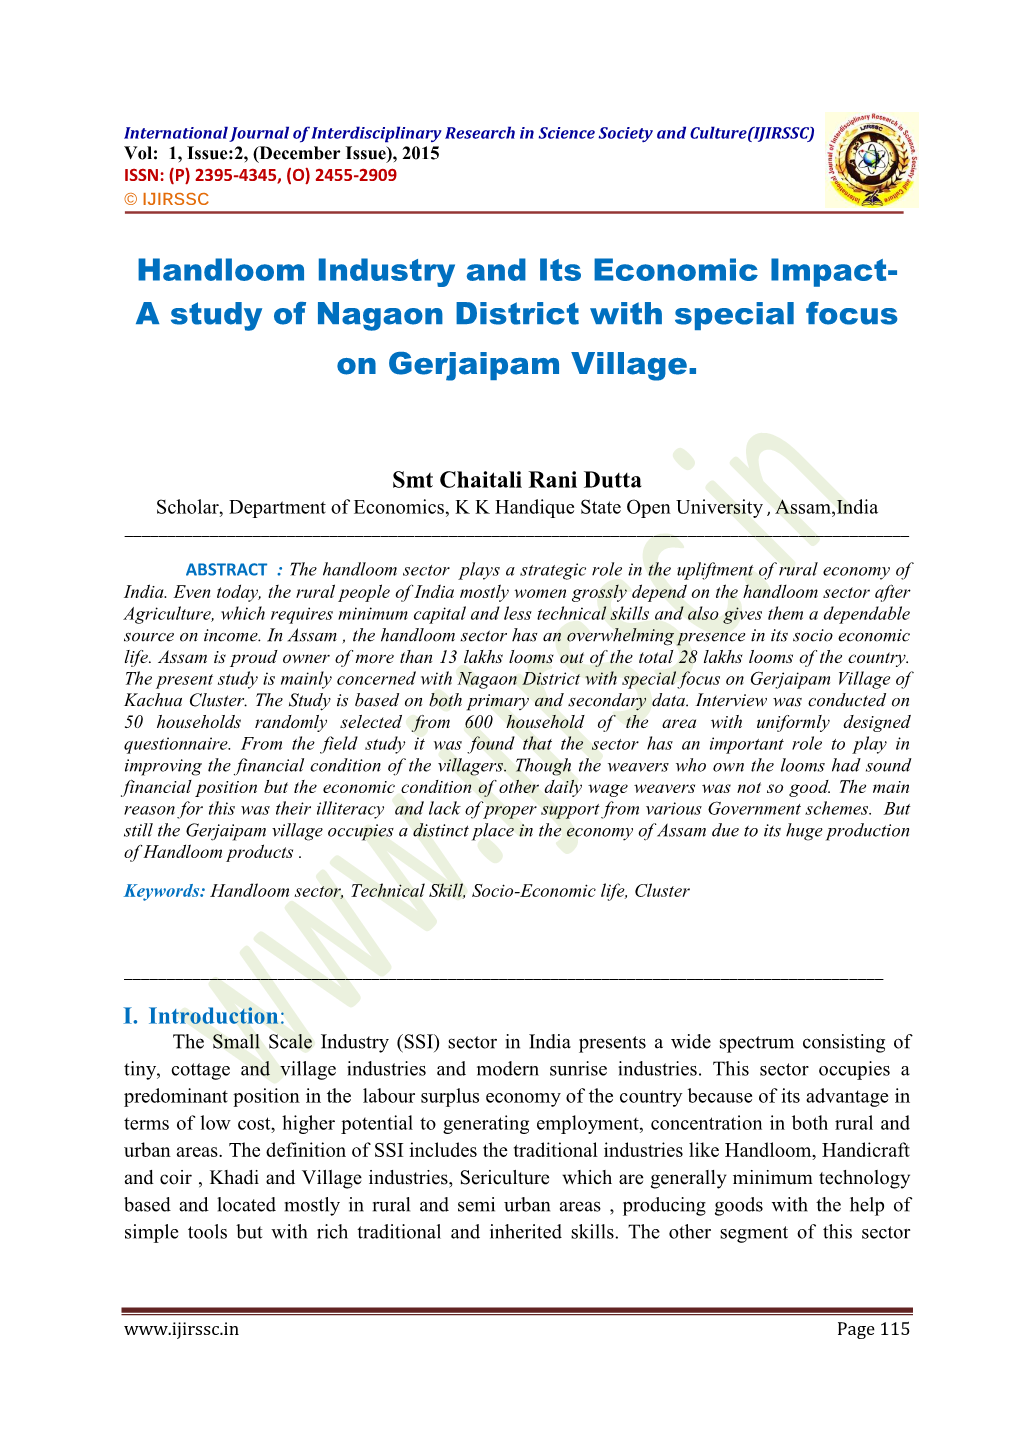 Handloom Industry and Its Economic Impact- a Study of Nagaon District with Special Focus on Gerjaipam Village